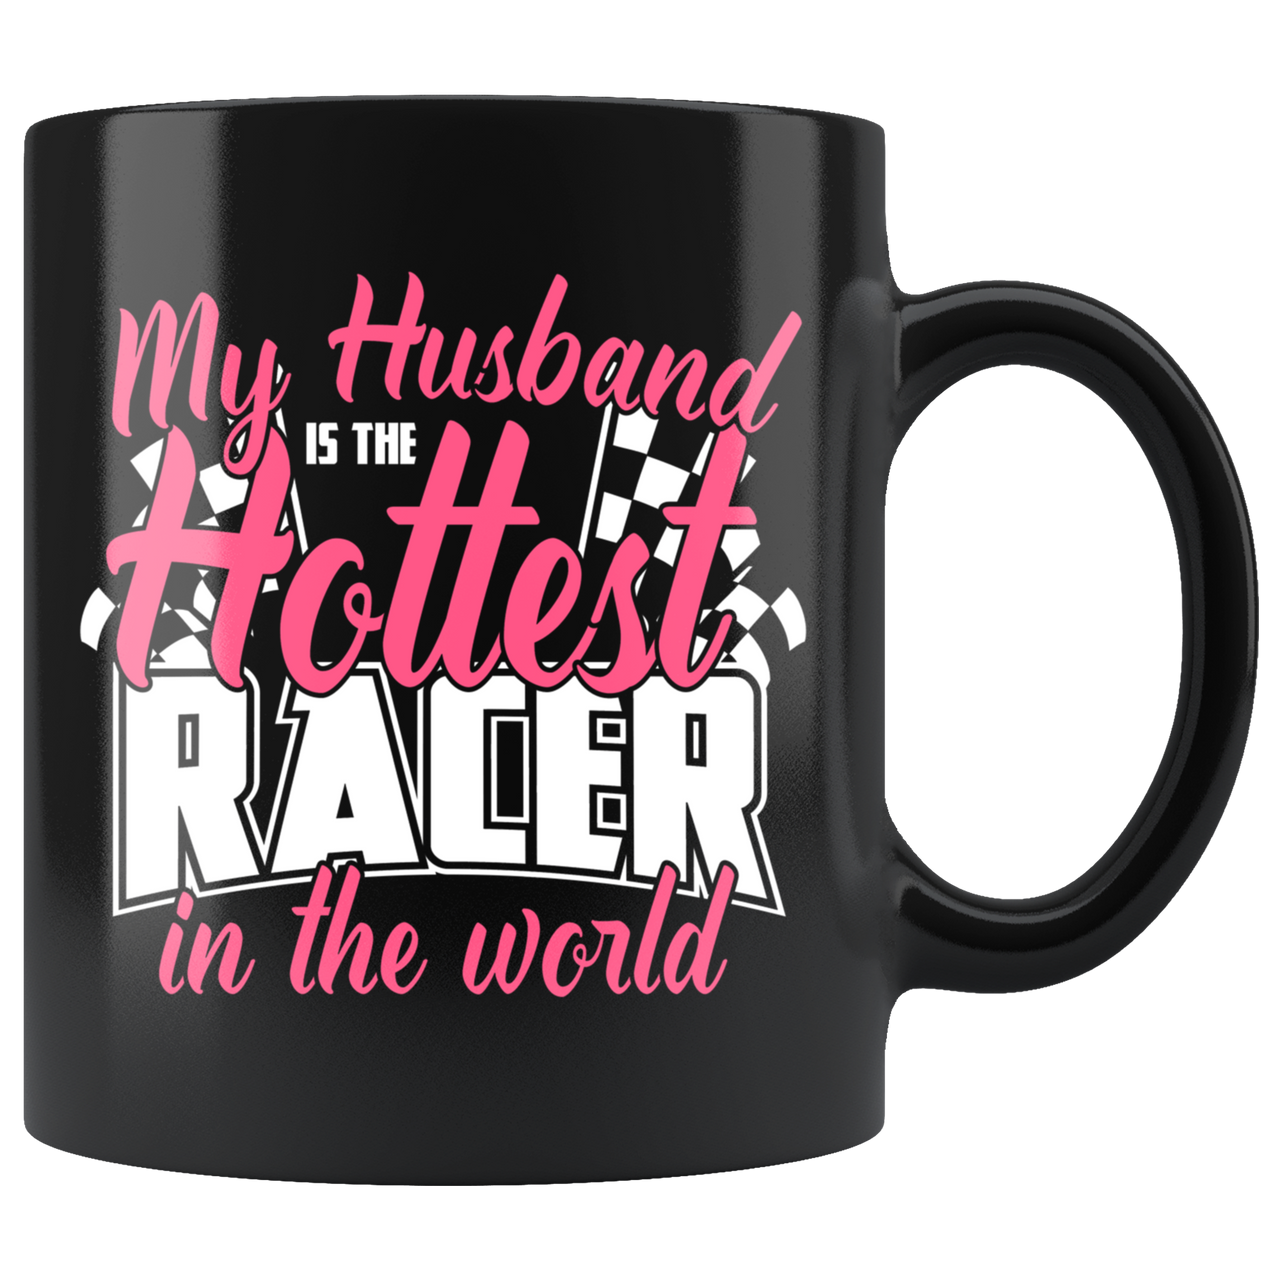 My Husband Is The Hottest Racer In Th World Mug!